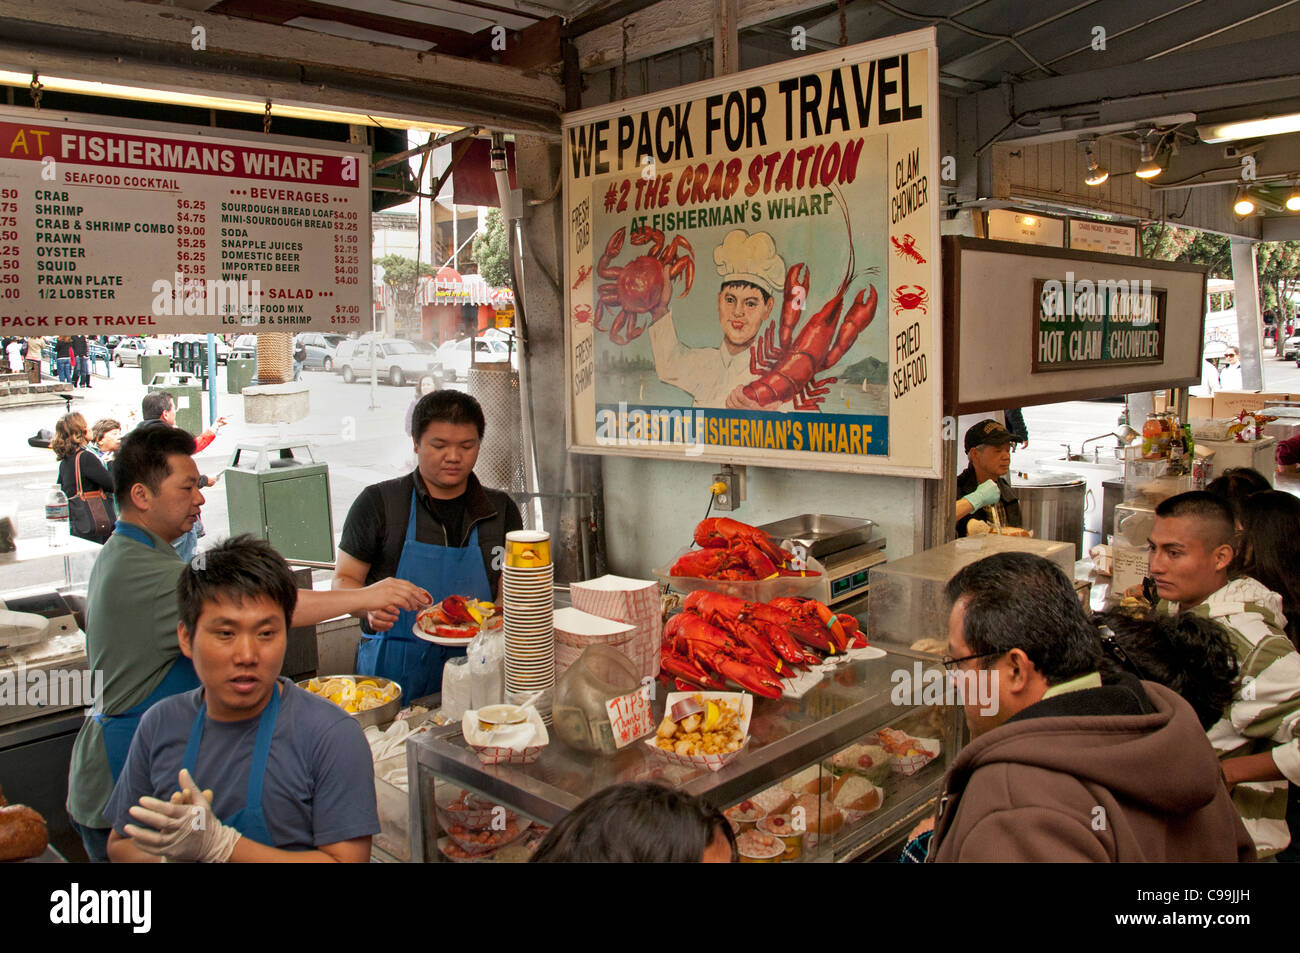 Fisherman's Wharf Lobster Restaurant San Francisco California United States Banque D'Images